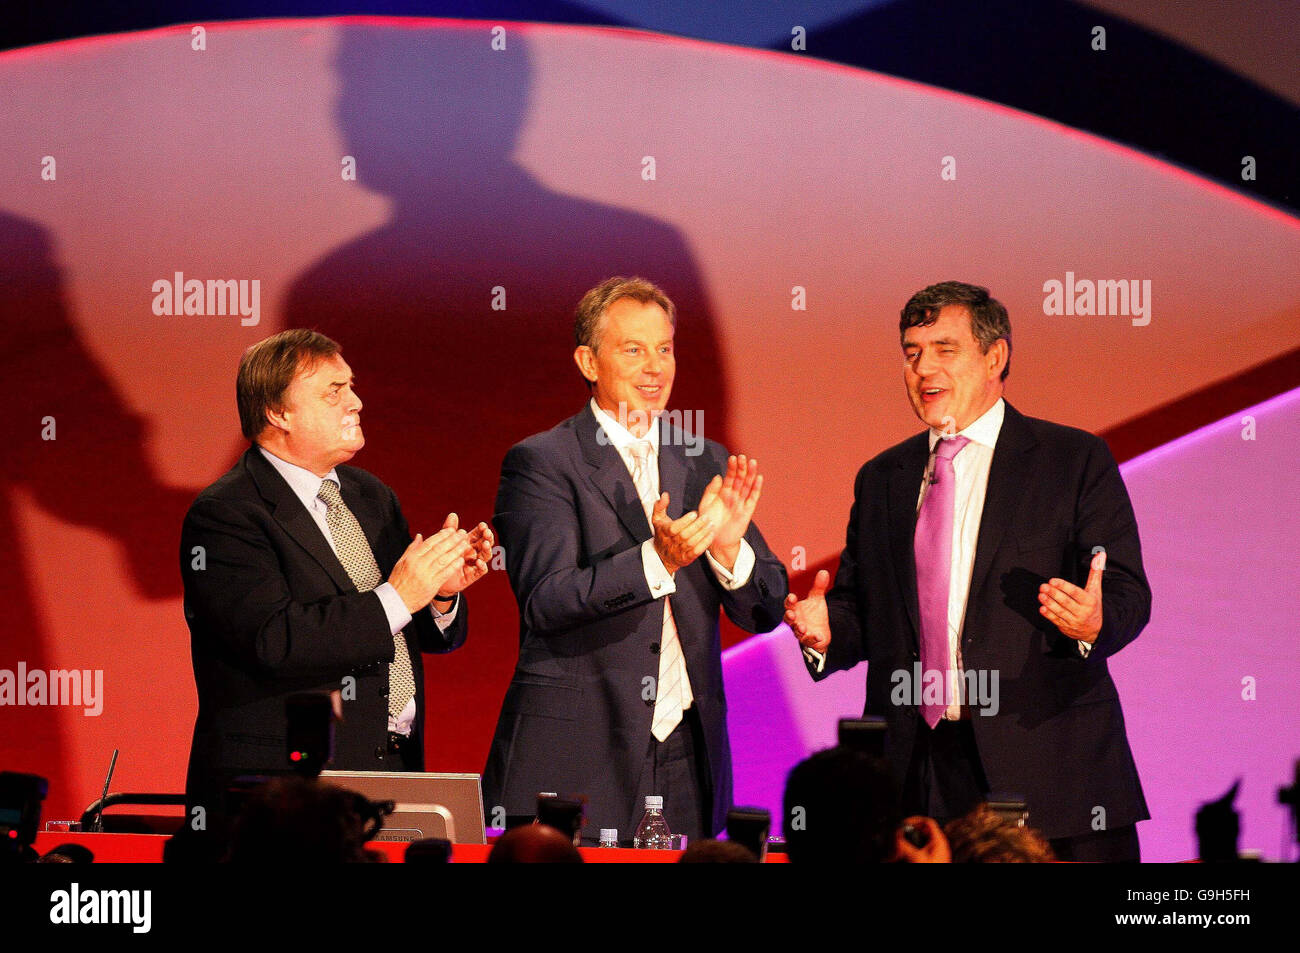 Prime Minister Tony Blair and deputy John Prescott congratulate Chancellor Gordon Brown after his speech to the Labour Party conference in Manchester. Stock Photo